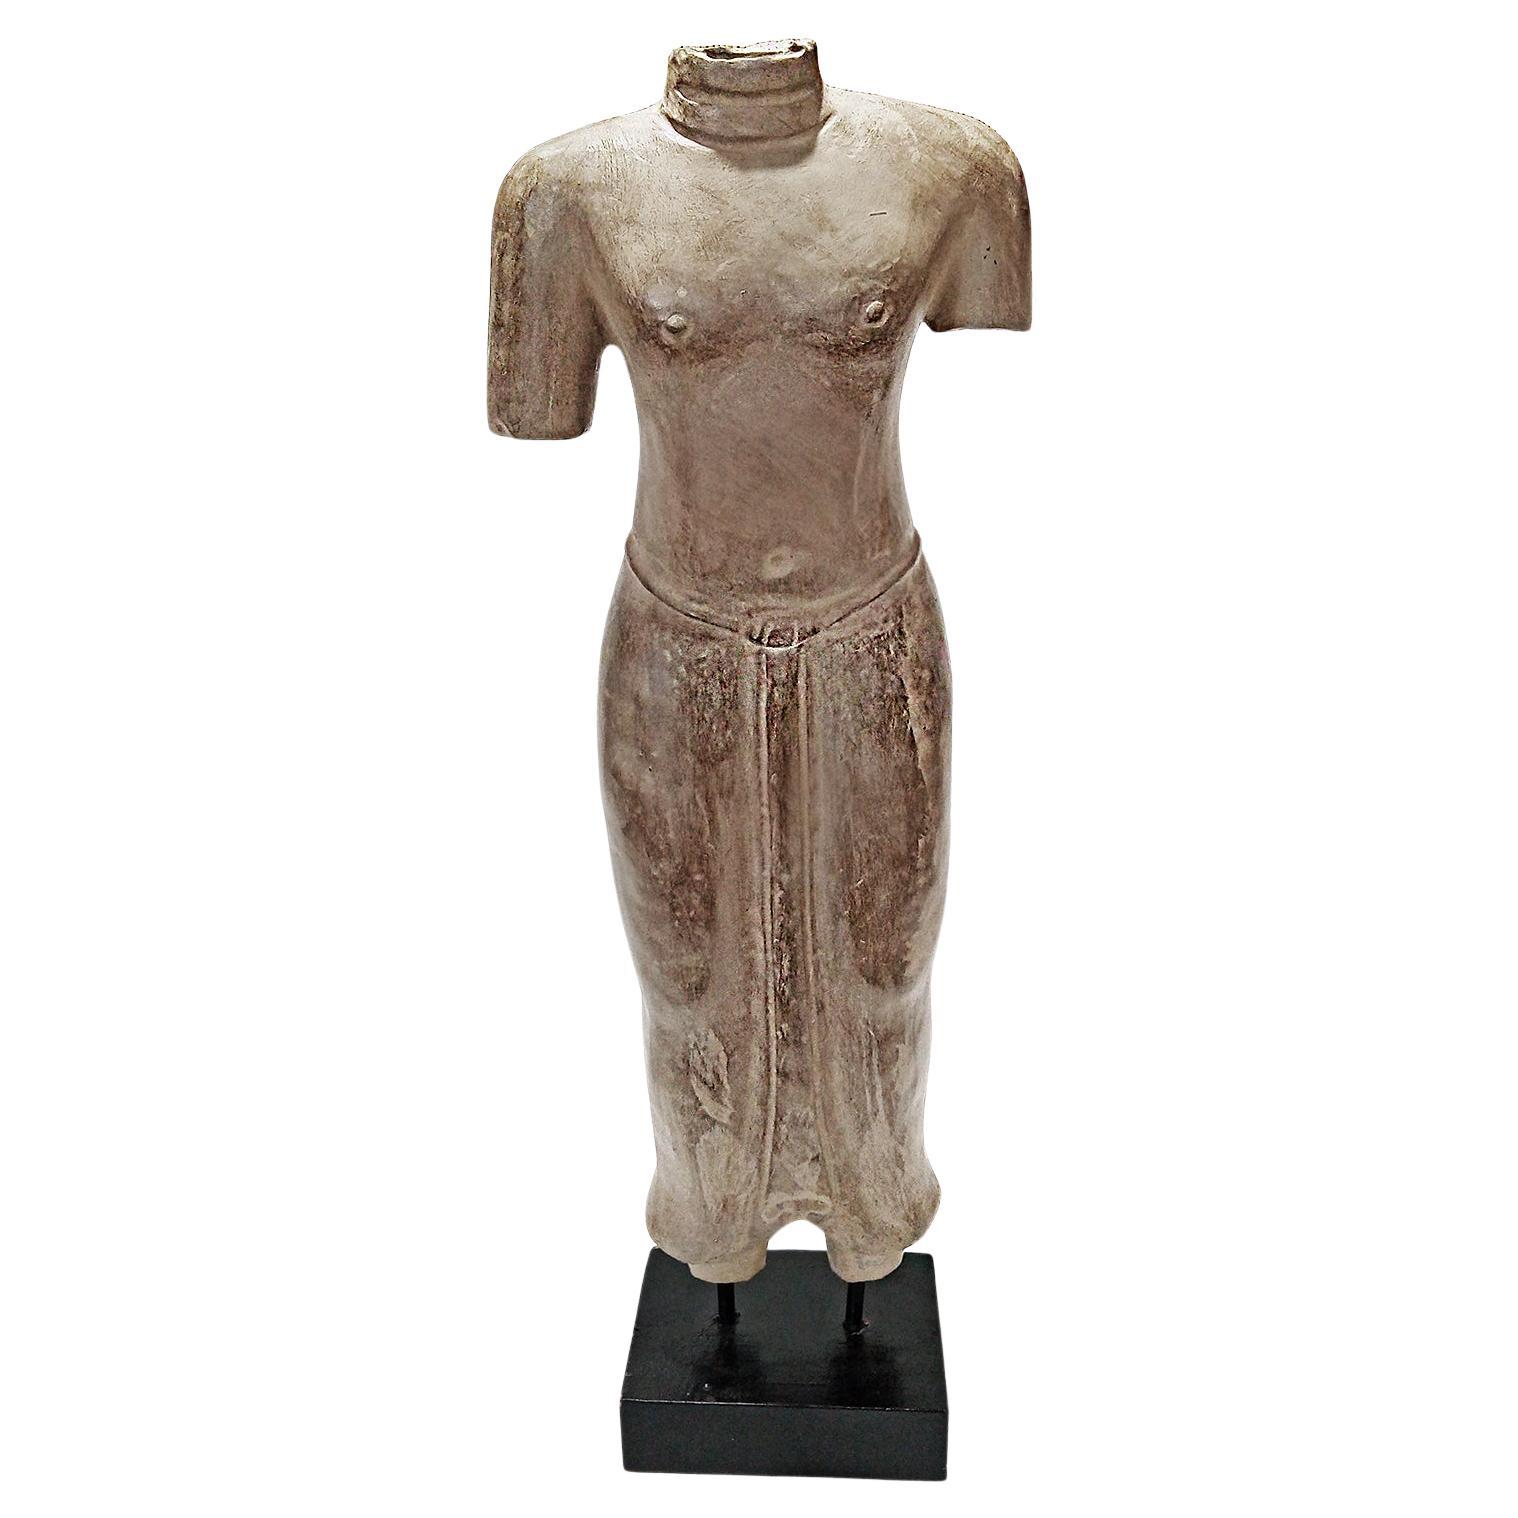 A table-top sculpture of a torso in traditional attire, hand carved from a single piece of sandstone. From Thailand. Contemporary.

Mounted on a wood / metal stand. 29.5 inches high, 10 inches wide, on a 5